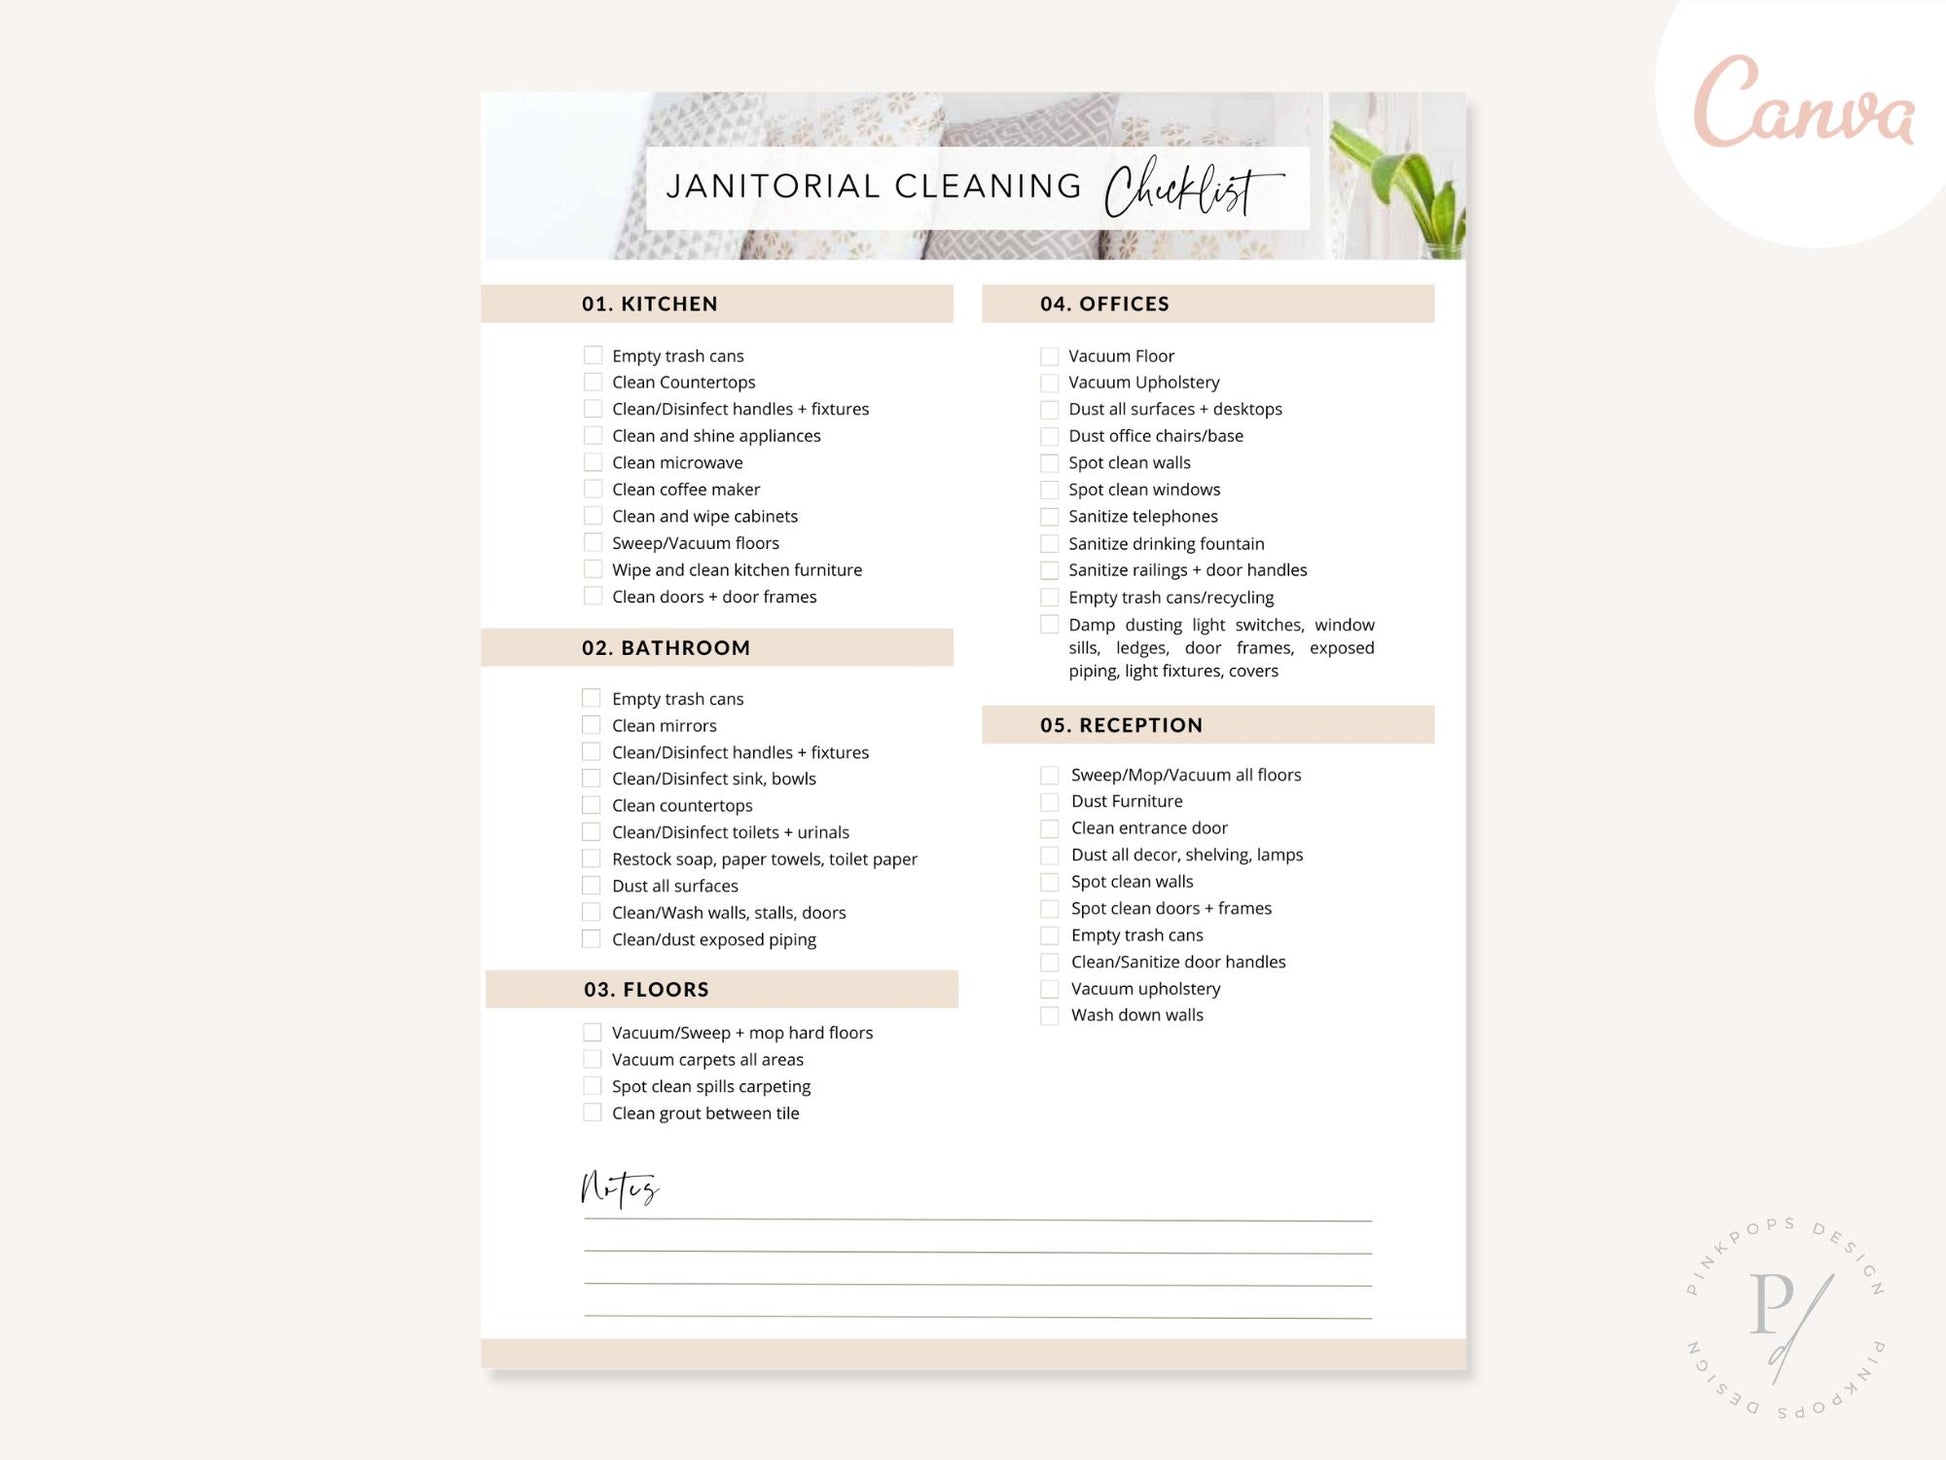 Janitorial Cleaning Checklist - Editable template for ensuring a systematic approach to janitorial cleaning tasks, maintaining cleanliness and order in any facility.